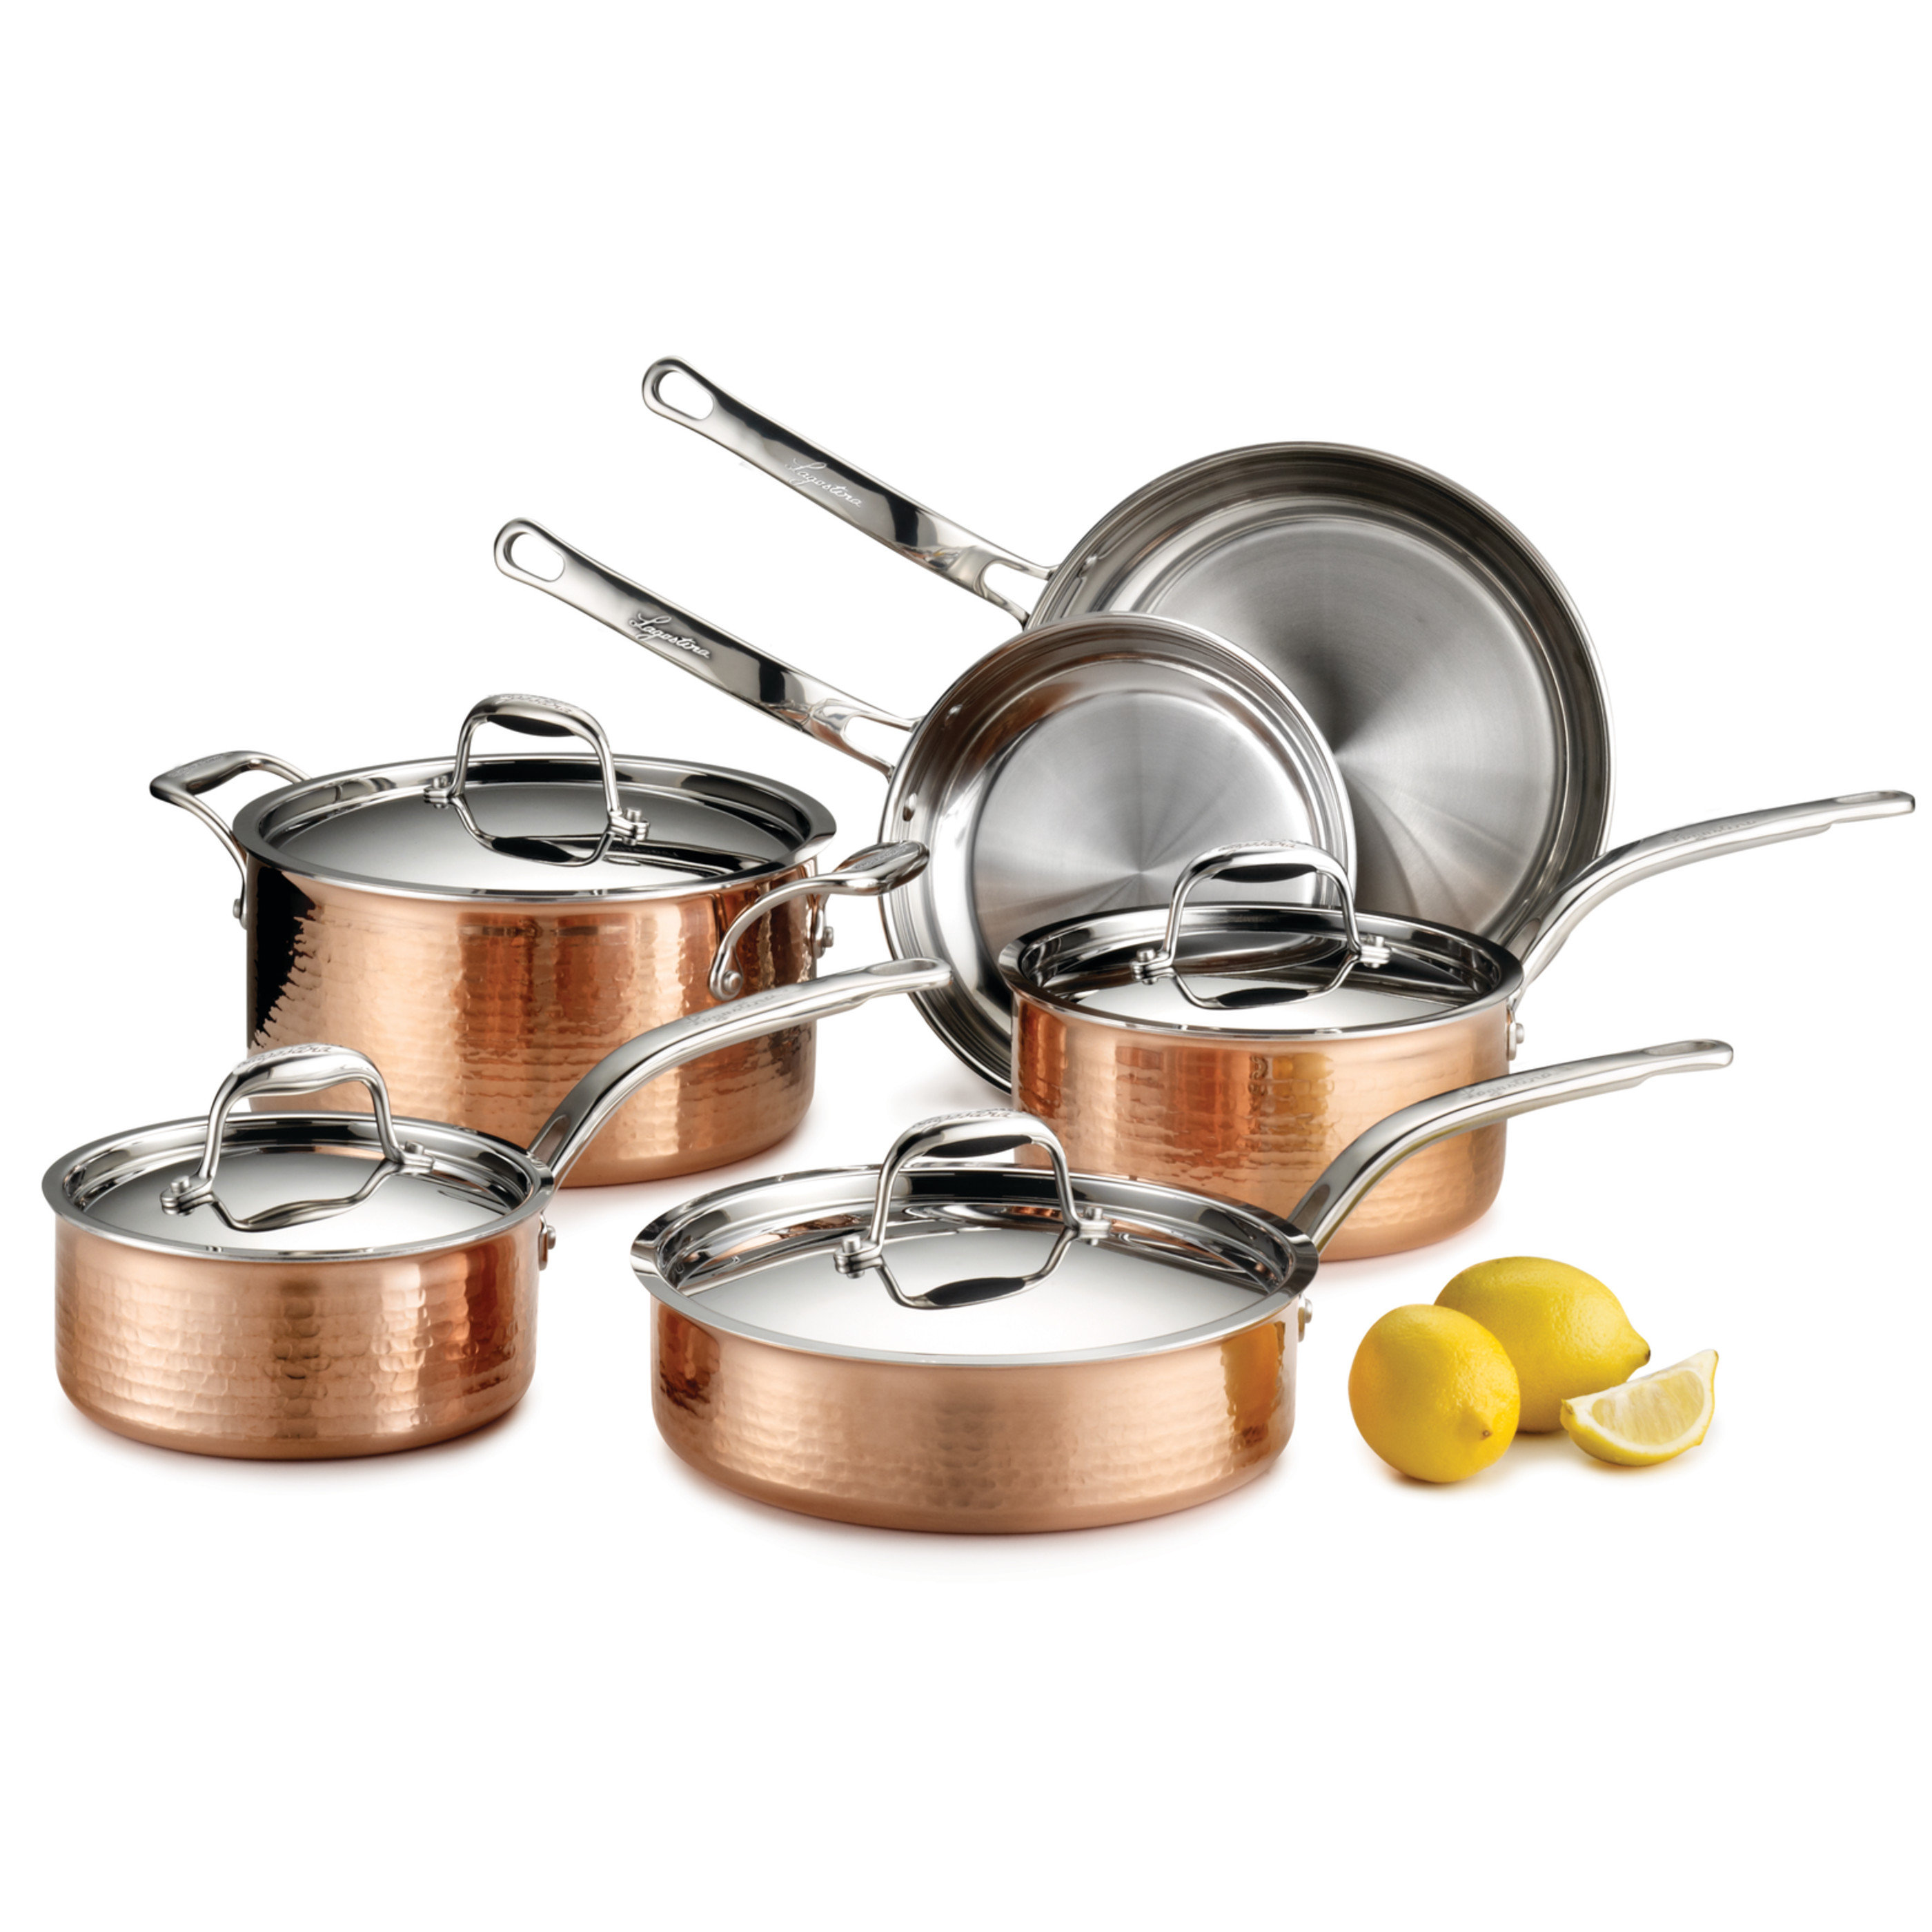 10pieces Stainless Steel Stock Pot Large Cooking Pot Set with